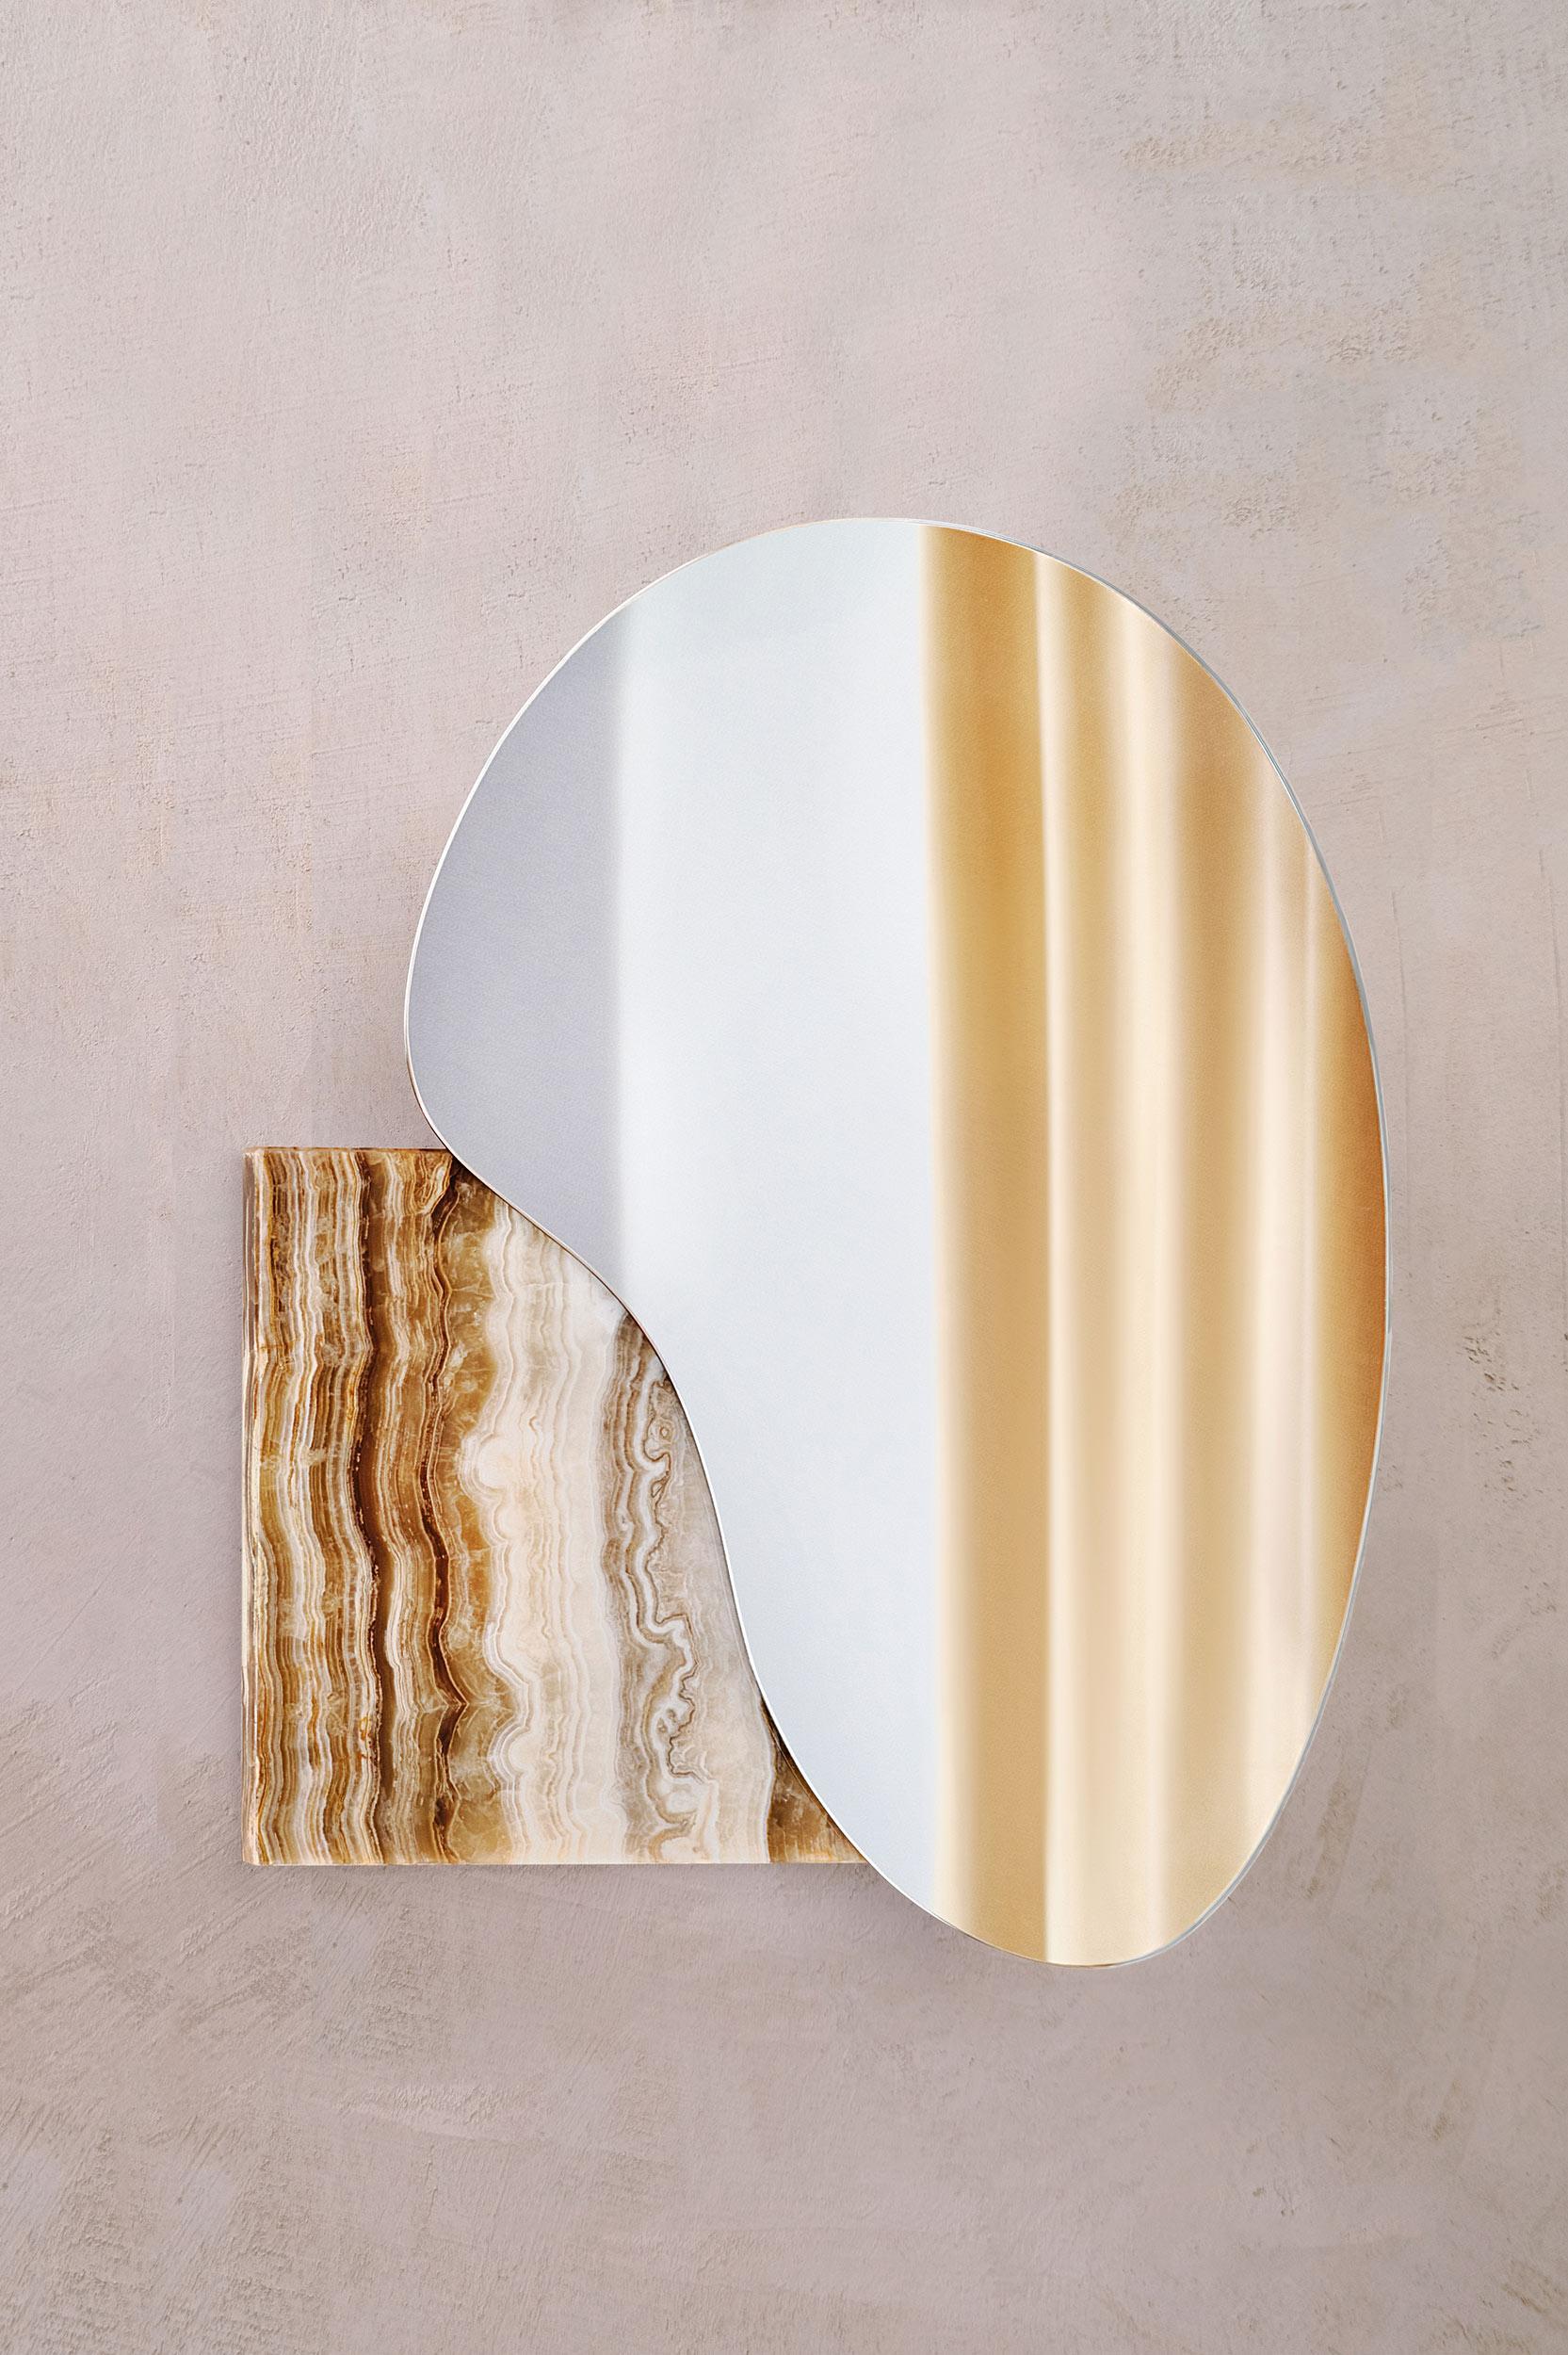 Brass Contemporary Wall Mirror Lake 4 by Noom, Veneered Wood Base For Sale